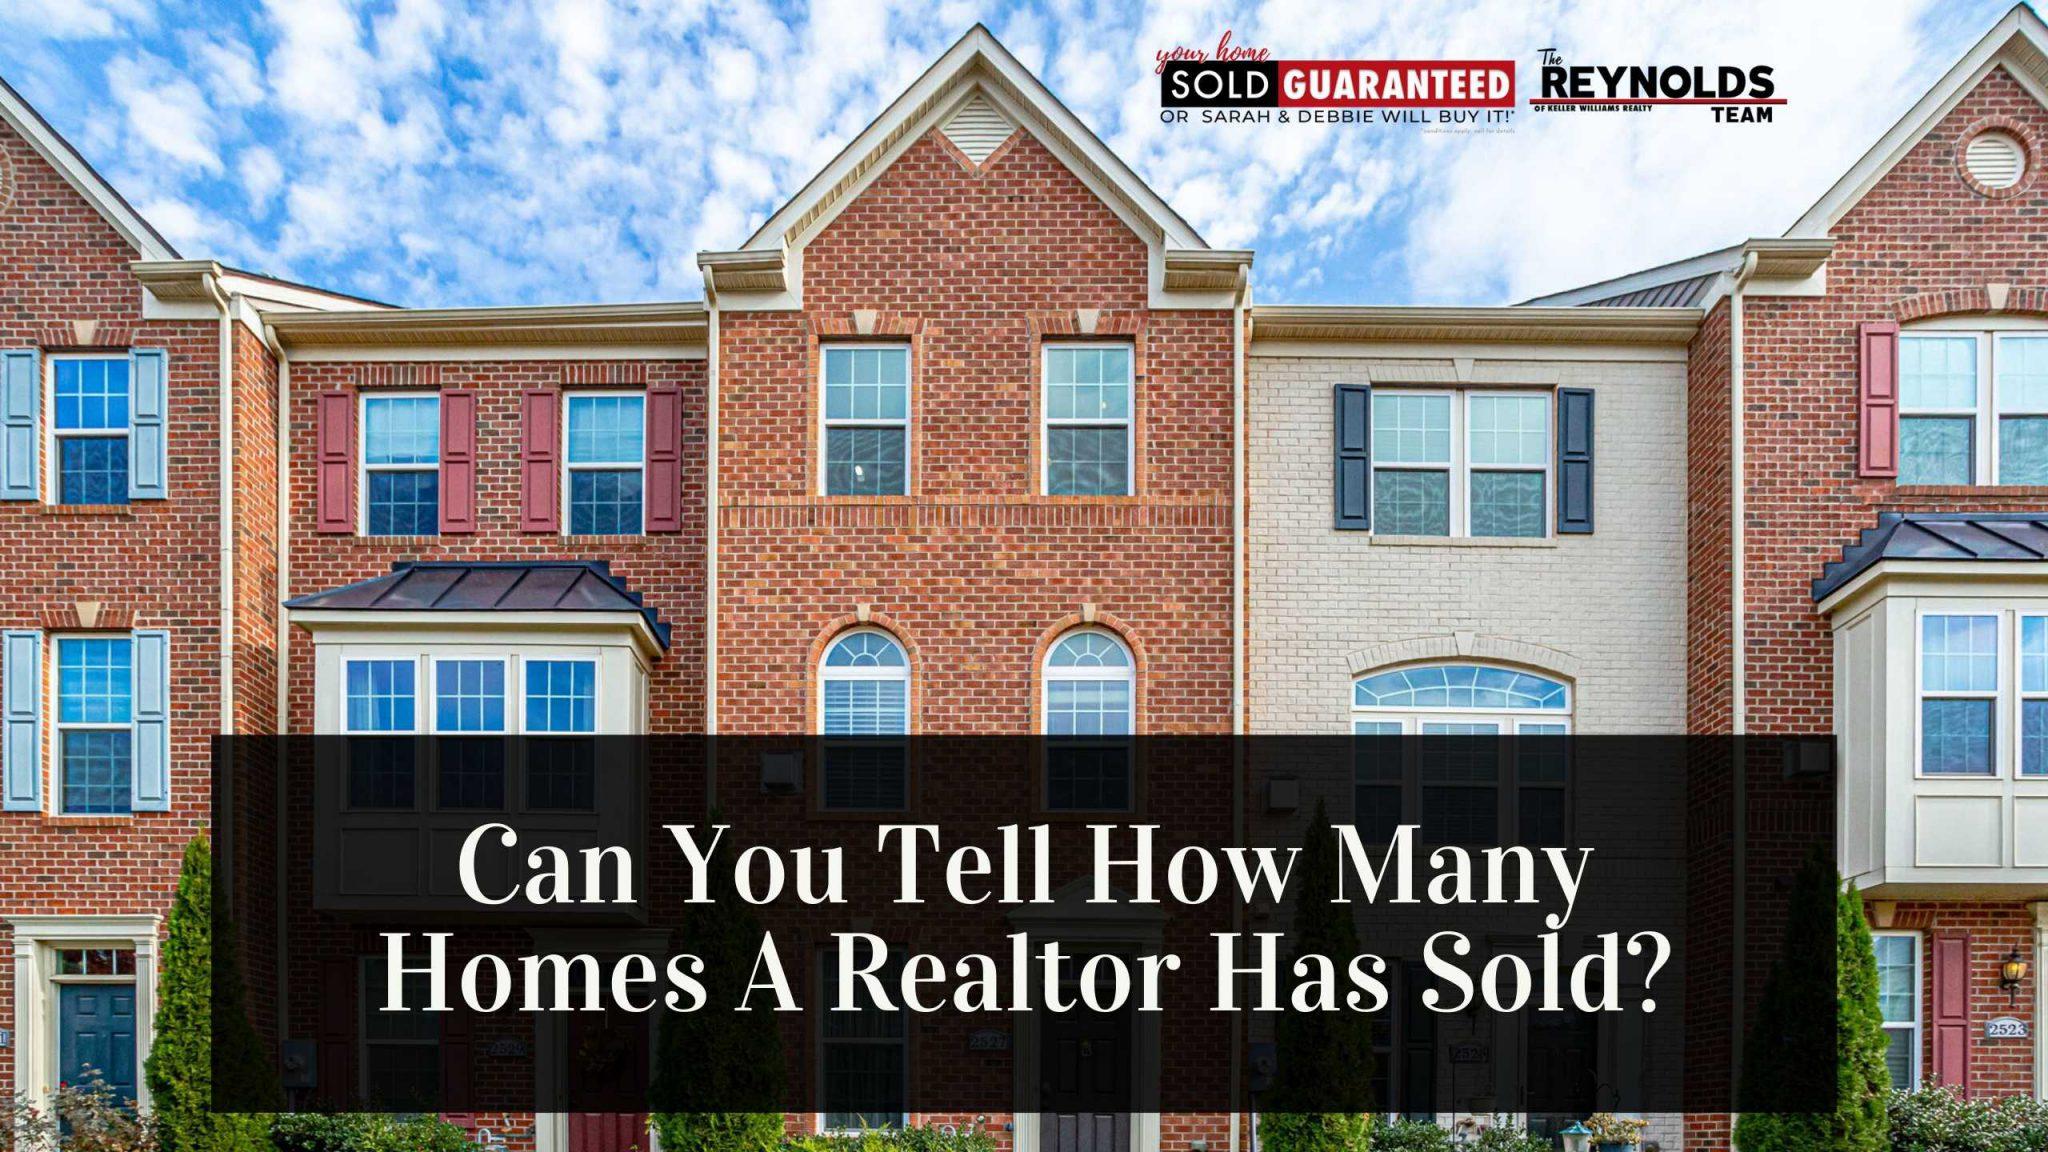 Can You Tell How Many Homes A Realtor Has Sold?